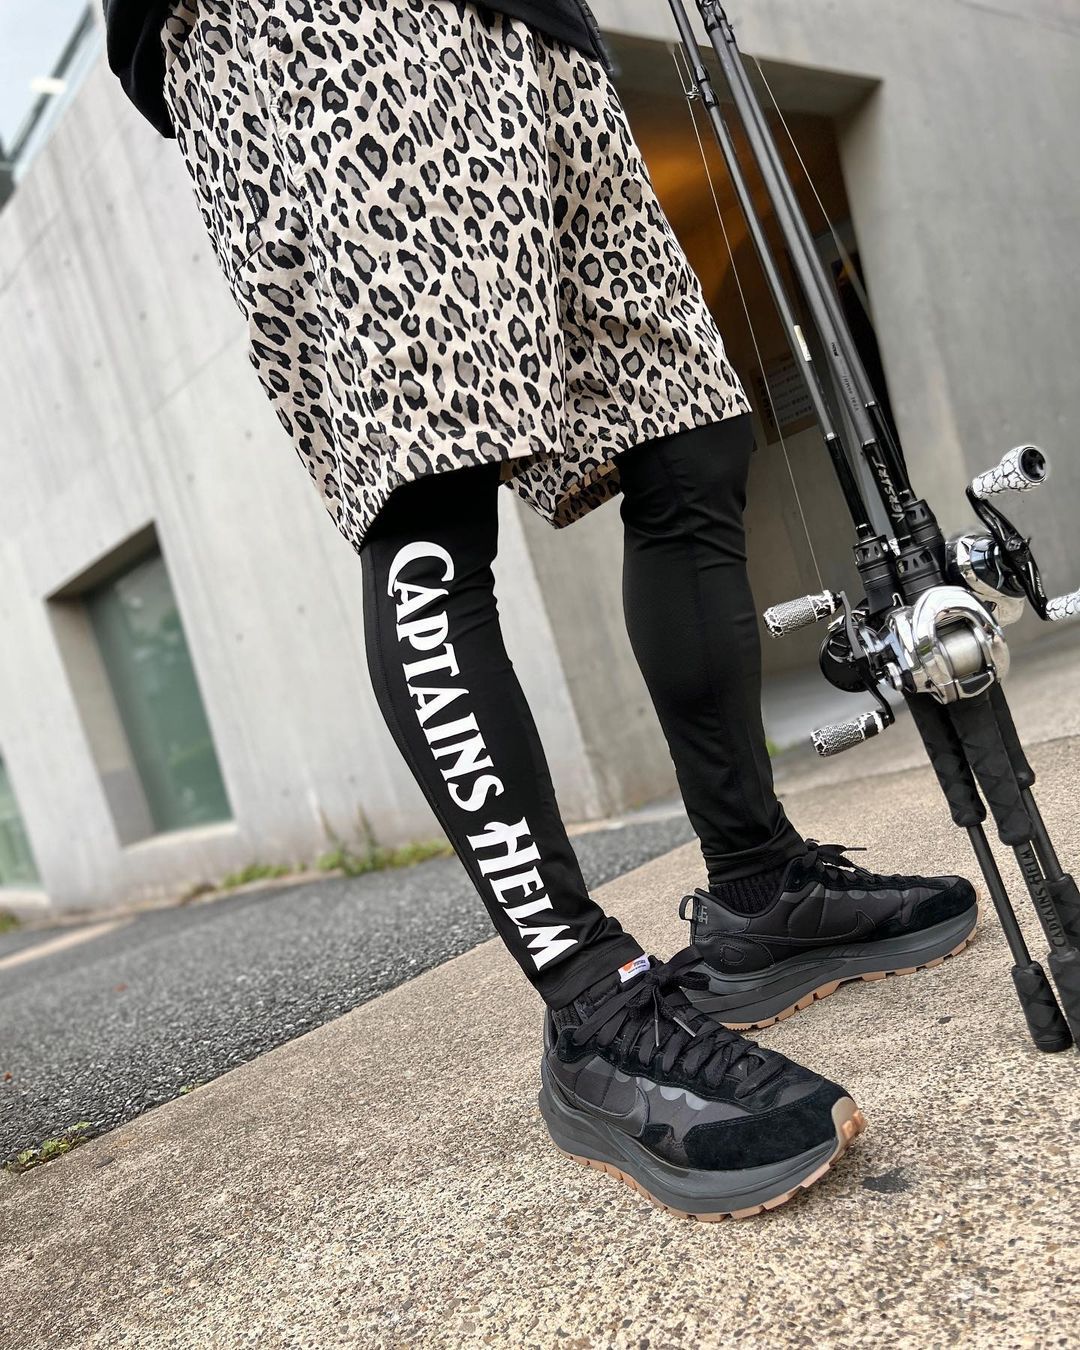 CAPTAINS HELM - ACTIVE TECHNOLOGY TIGHTS (BLACK) / アクティブ 